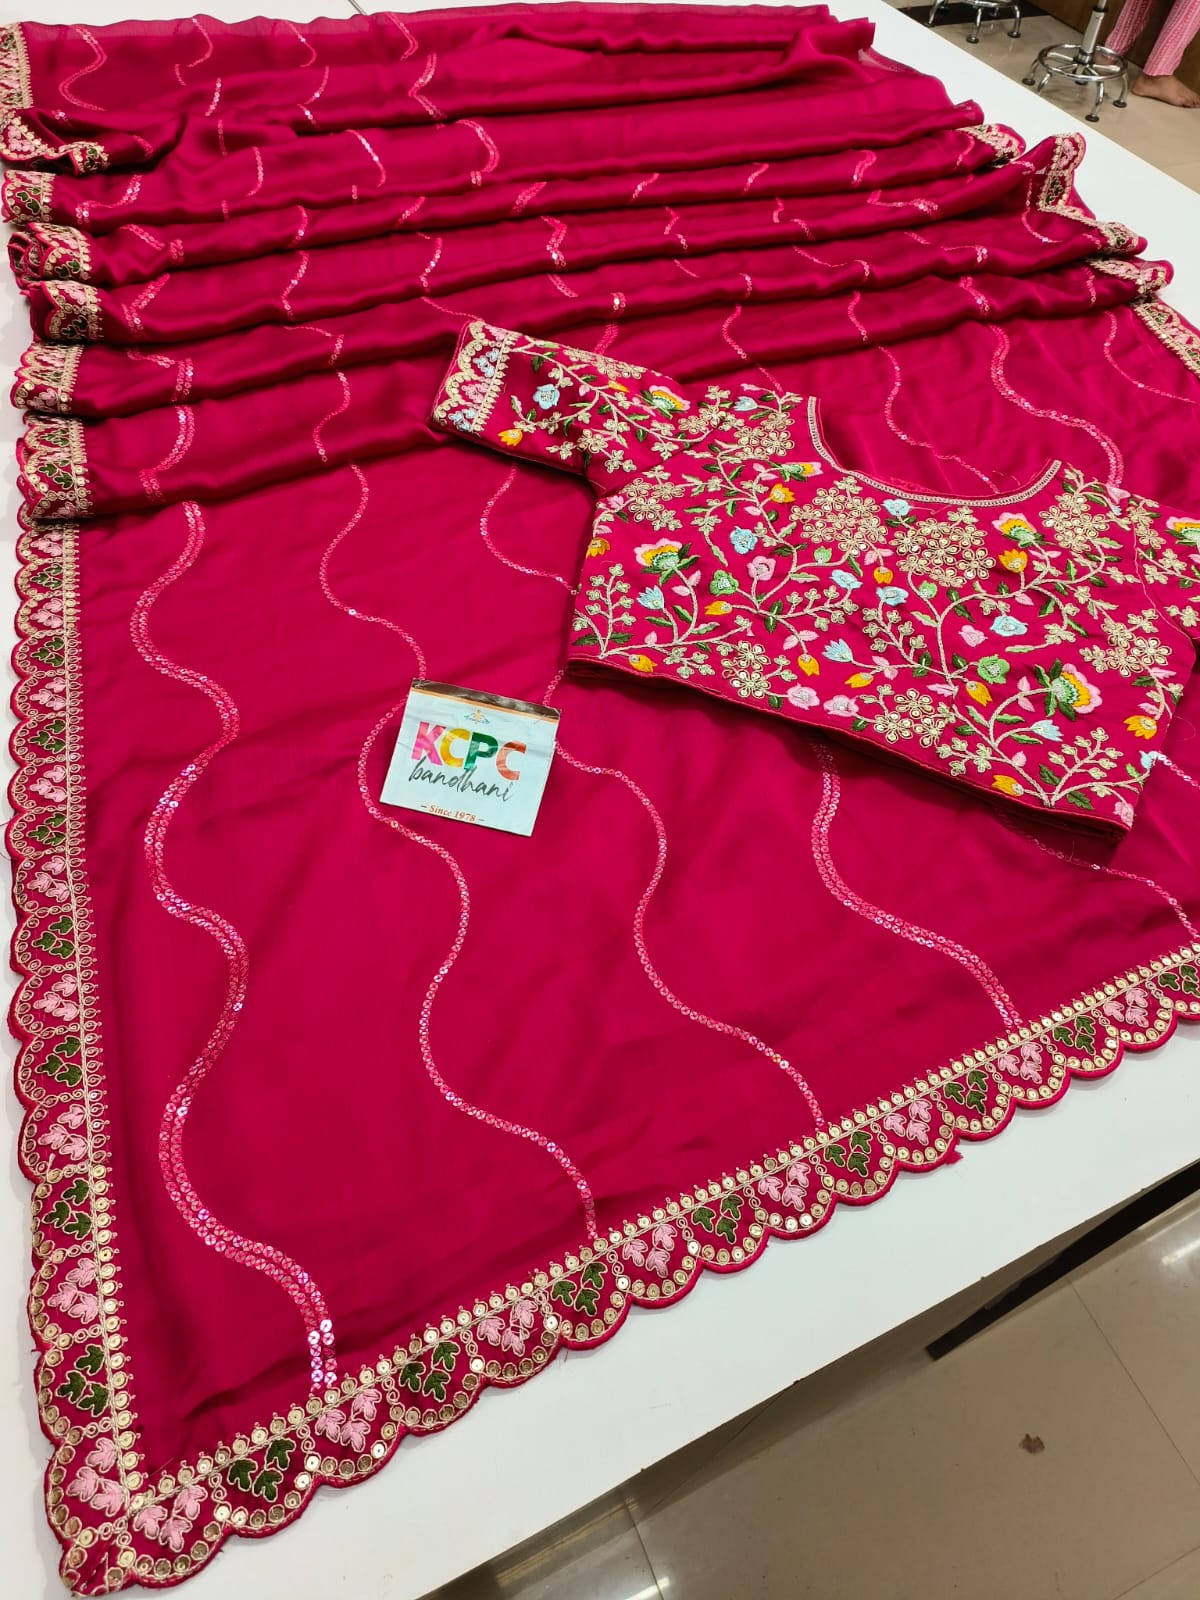 Kcpc Designer Party Wear Pure Fabric Sarees With Stitched Blouse Nr Kc Rani Saree